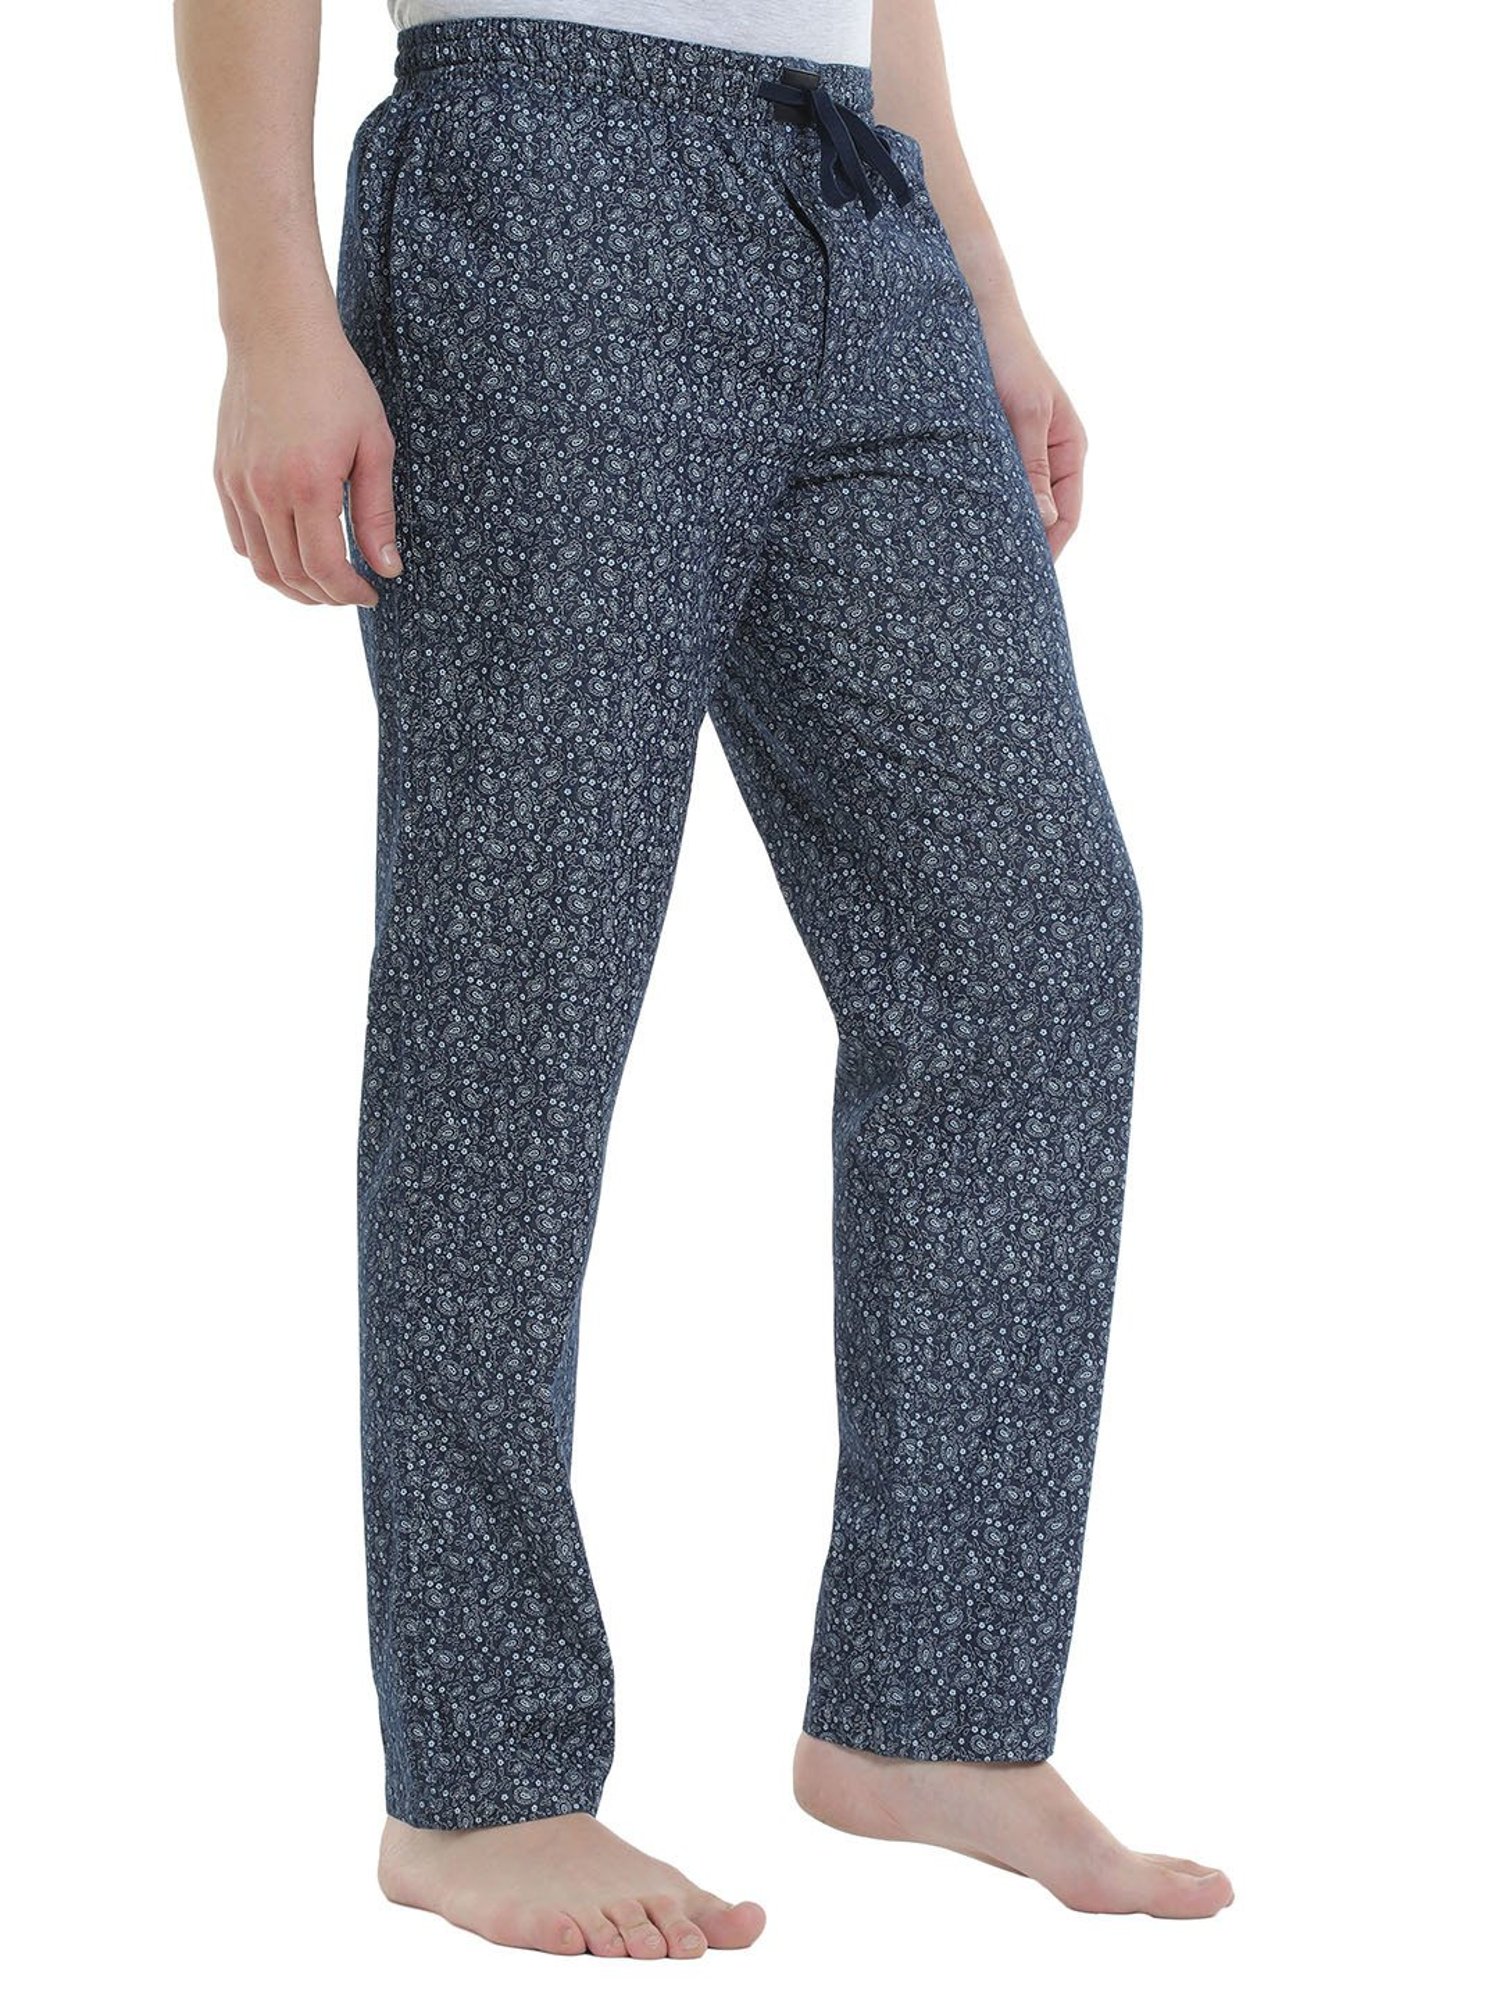 Buy The Cotton Company 100 Cotton Lounge and Track Pants for Men  Solid  Light Grey Small Relaxed at Amazonin